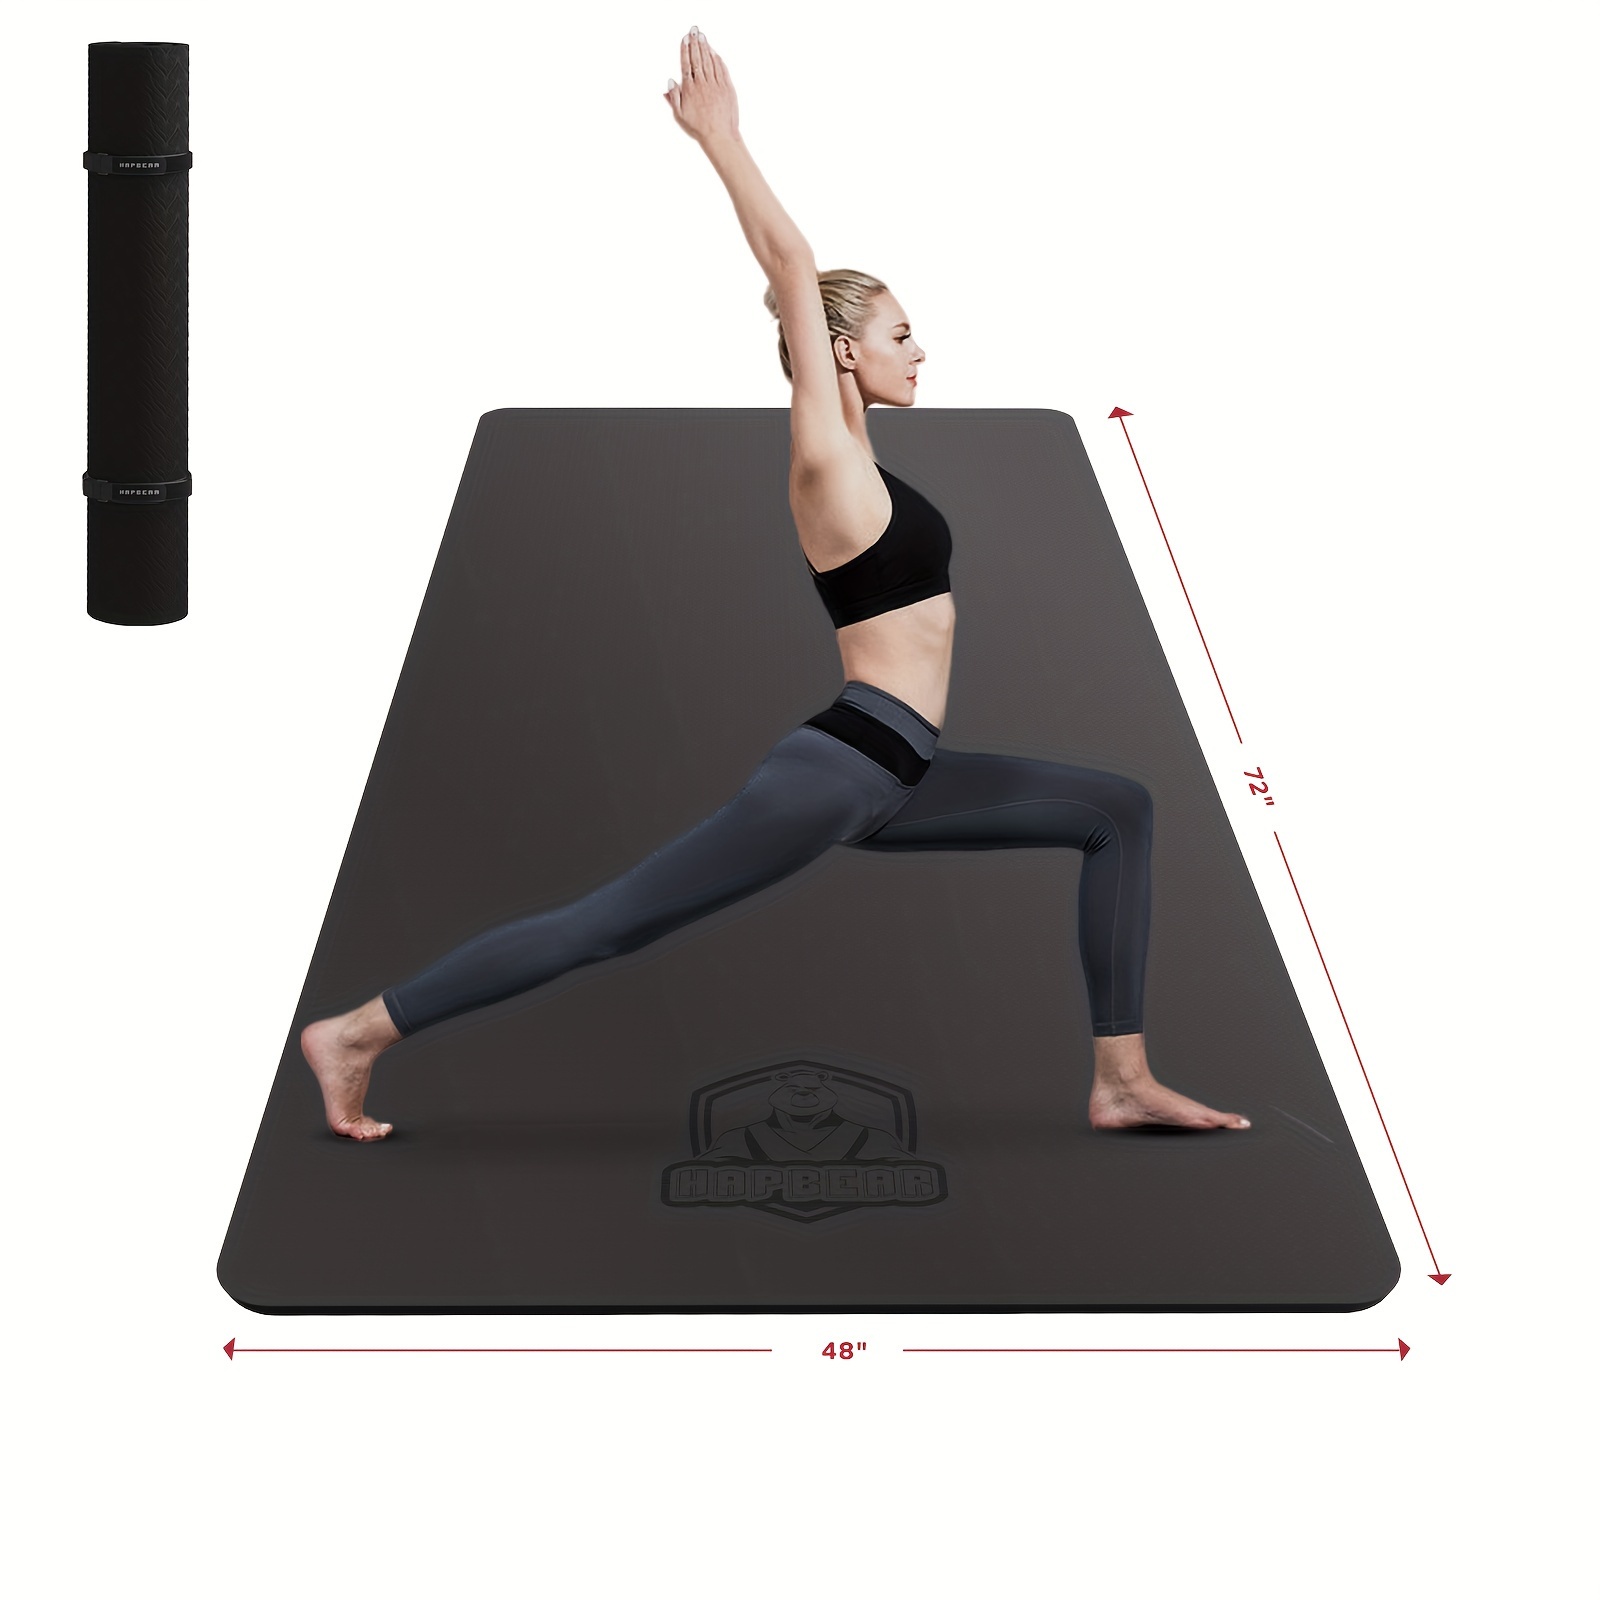 

Hapbear Extra Large Yoga Mat - 72"x48""x6mm (1/4 Inch), Non-slip, Durable, Thick Wide Exercise Mat For Home Workouts, Yoga, Pilates, Stretching, Meditation (barefoot Exercise)